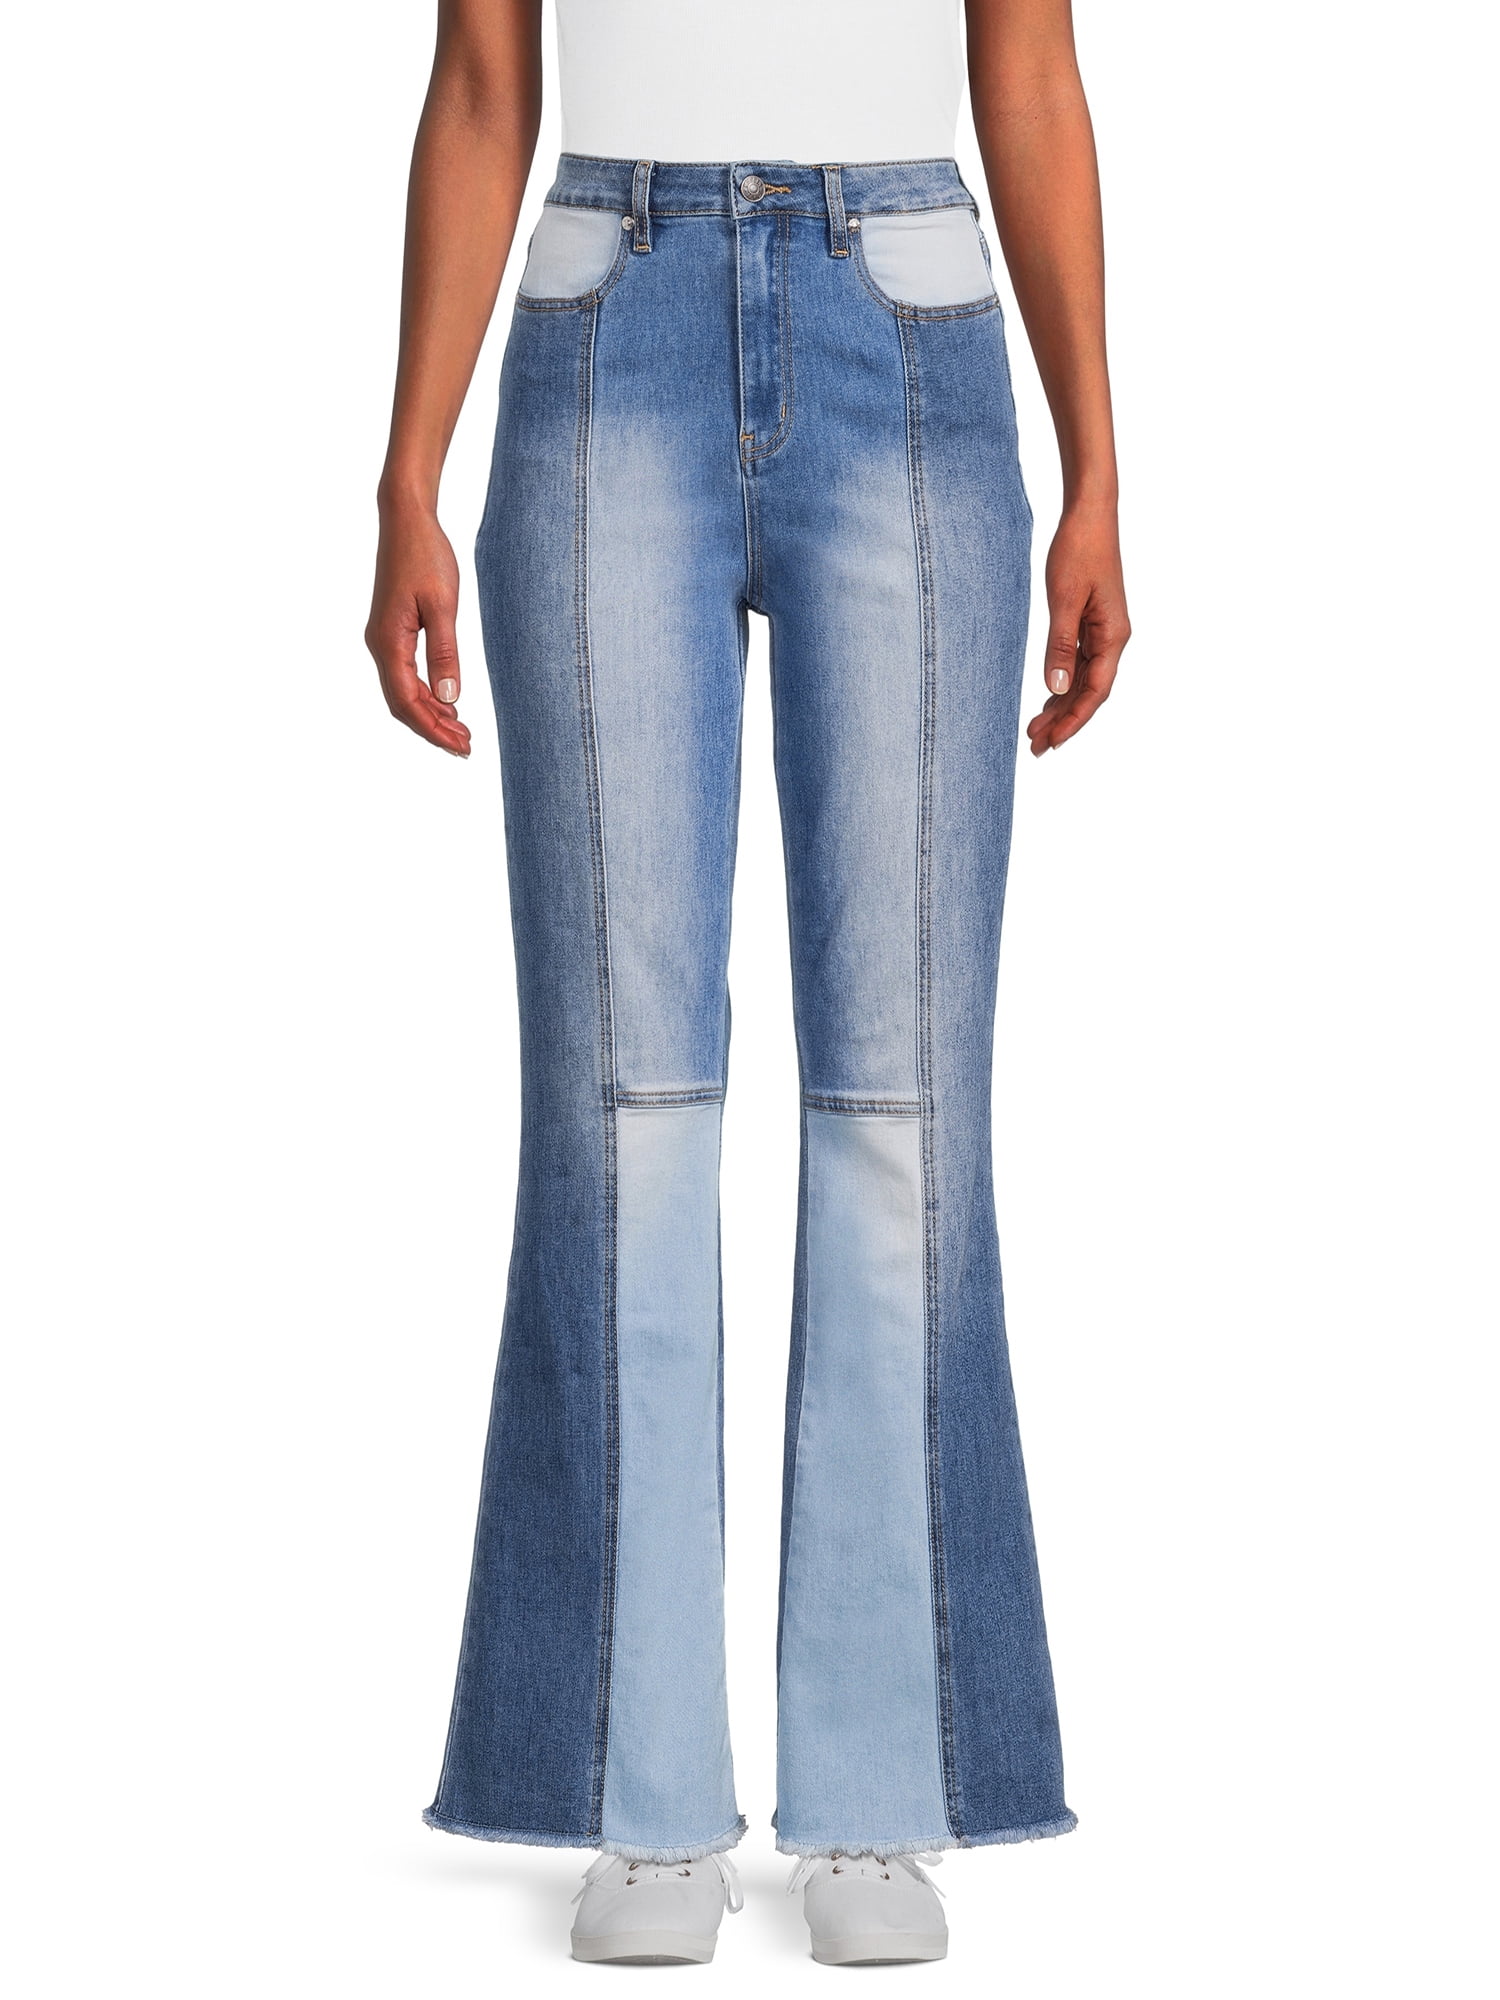 Madden NYC Junior's Patchwork Flare Jeans